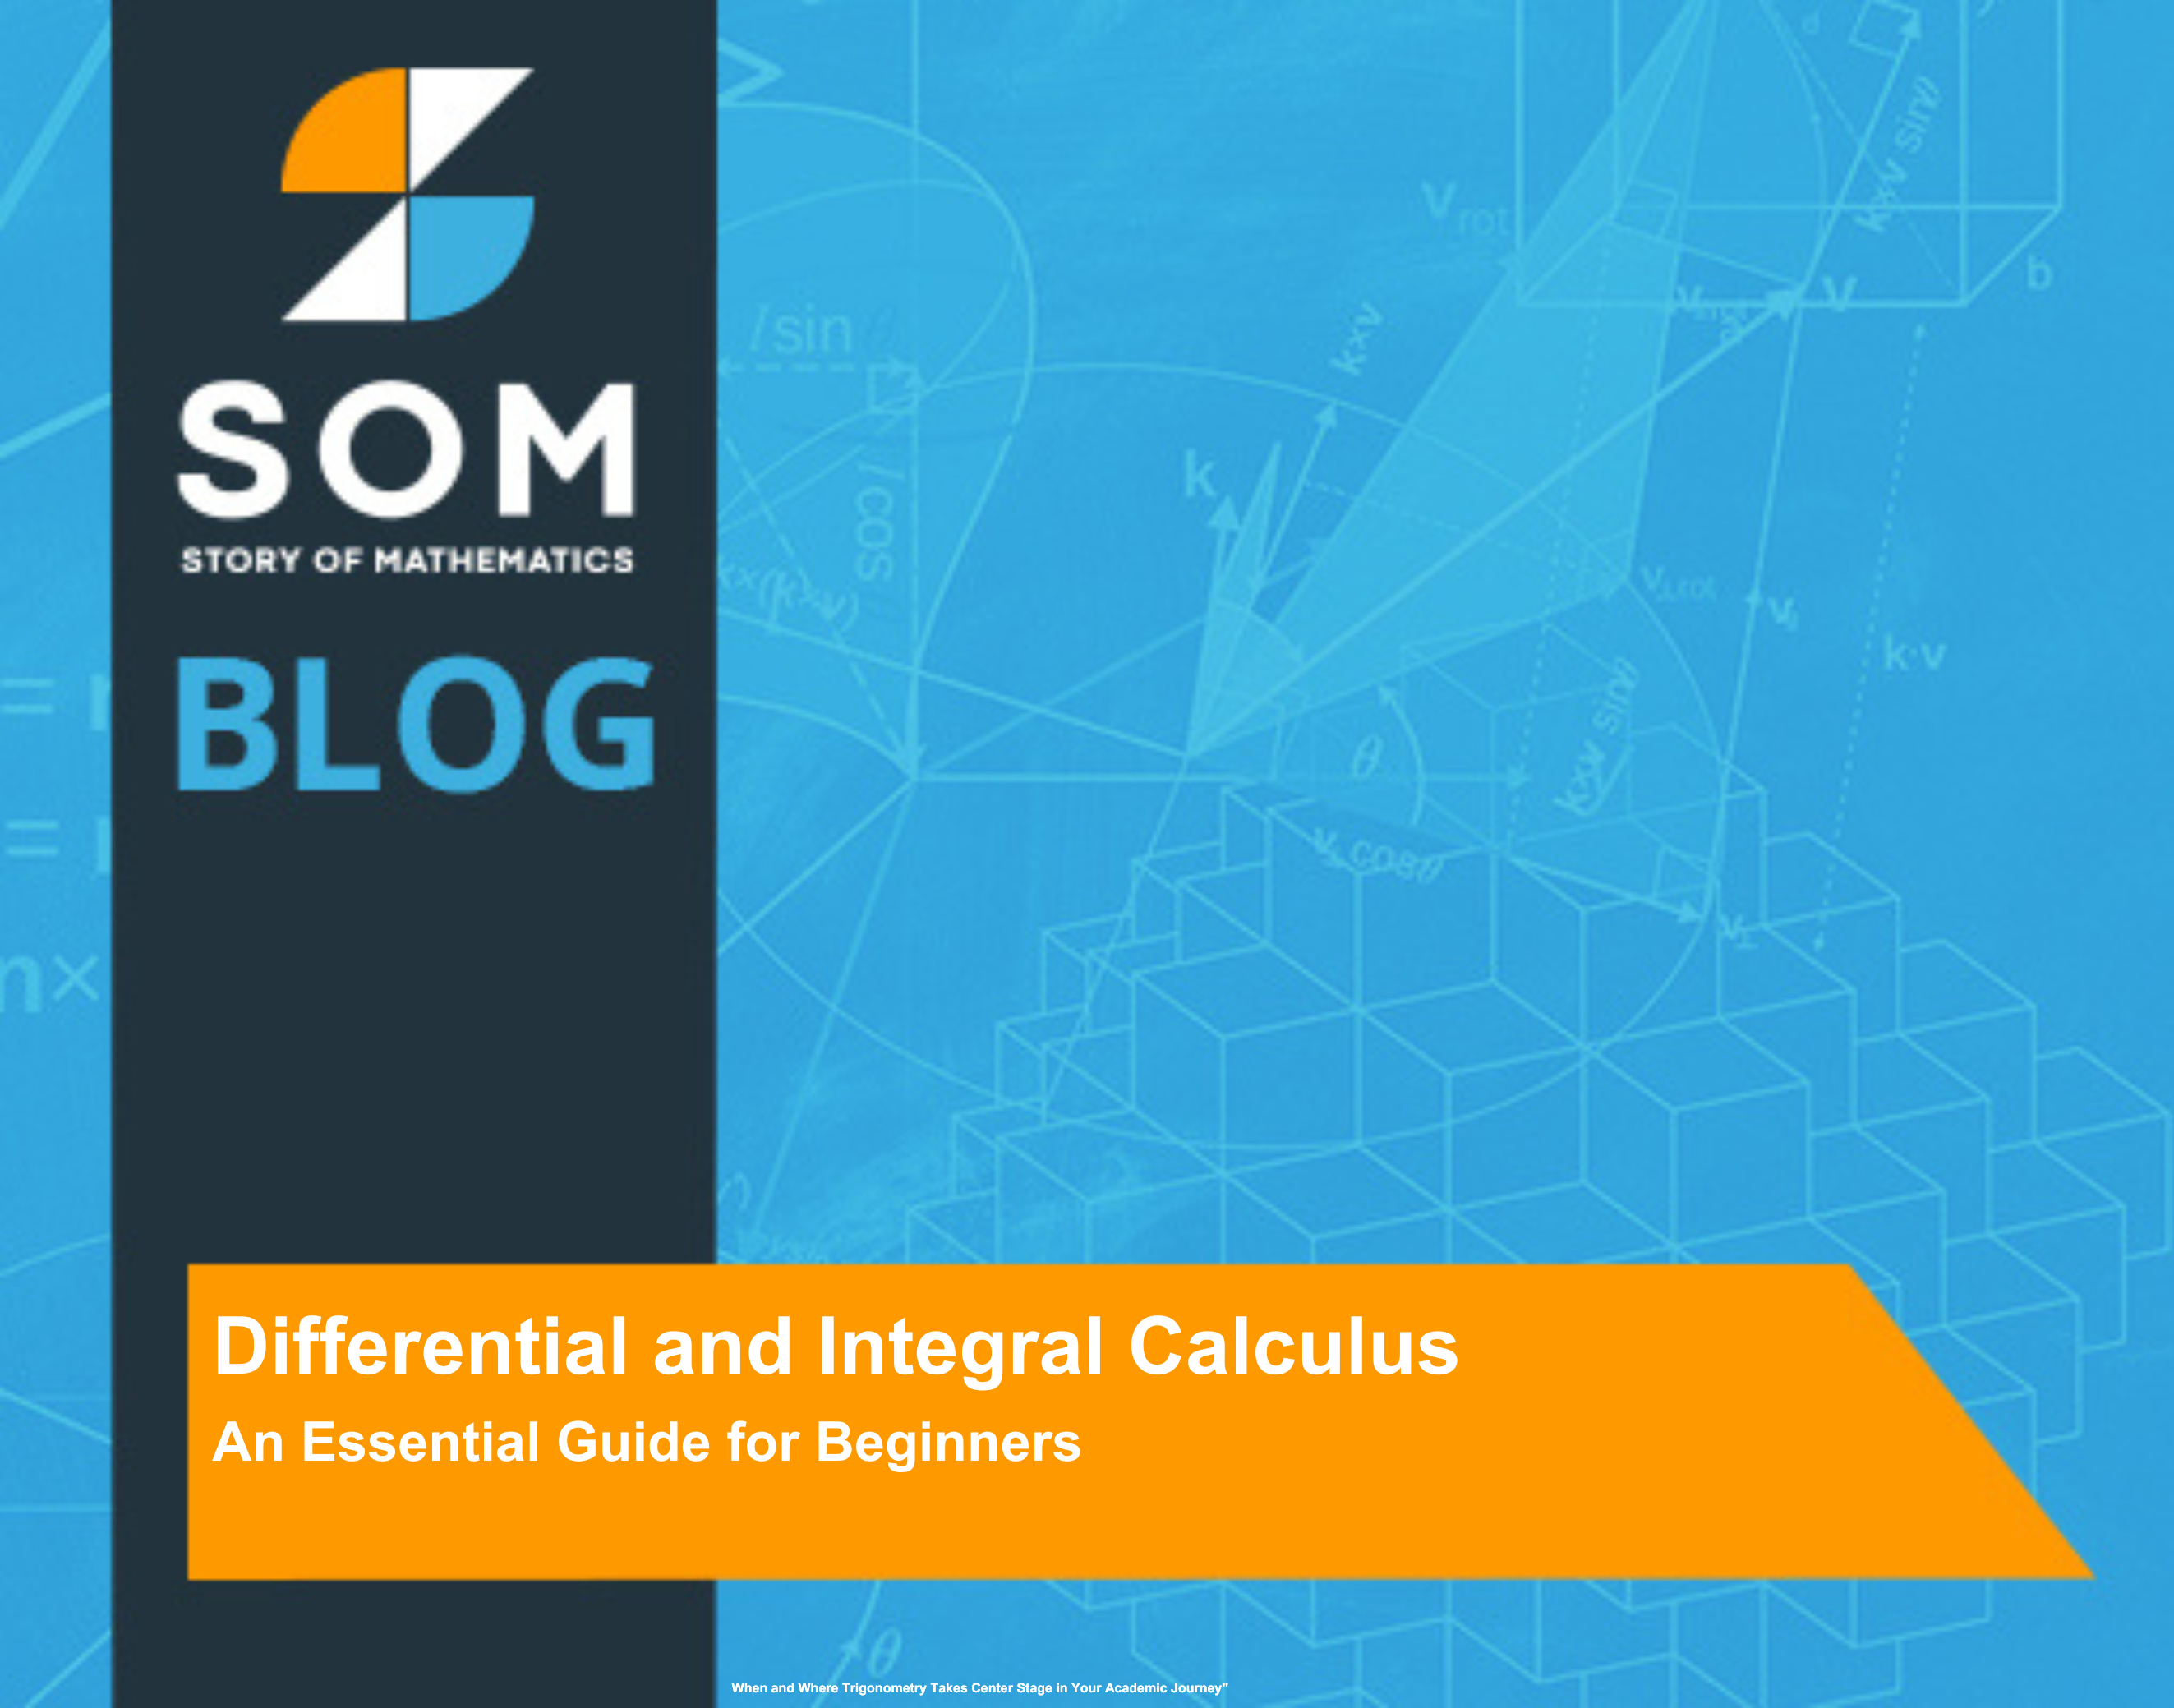 Feature Image Differential and Integral Calculus An Essential Guide for Beginners